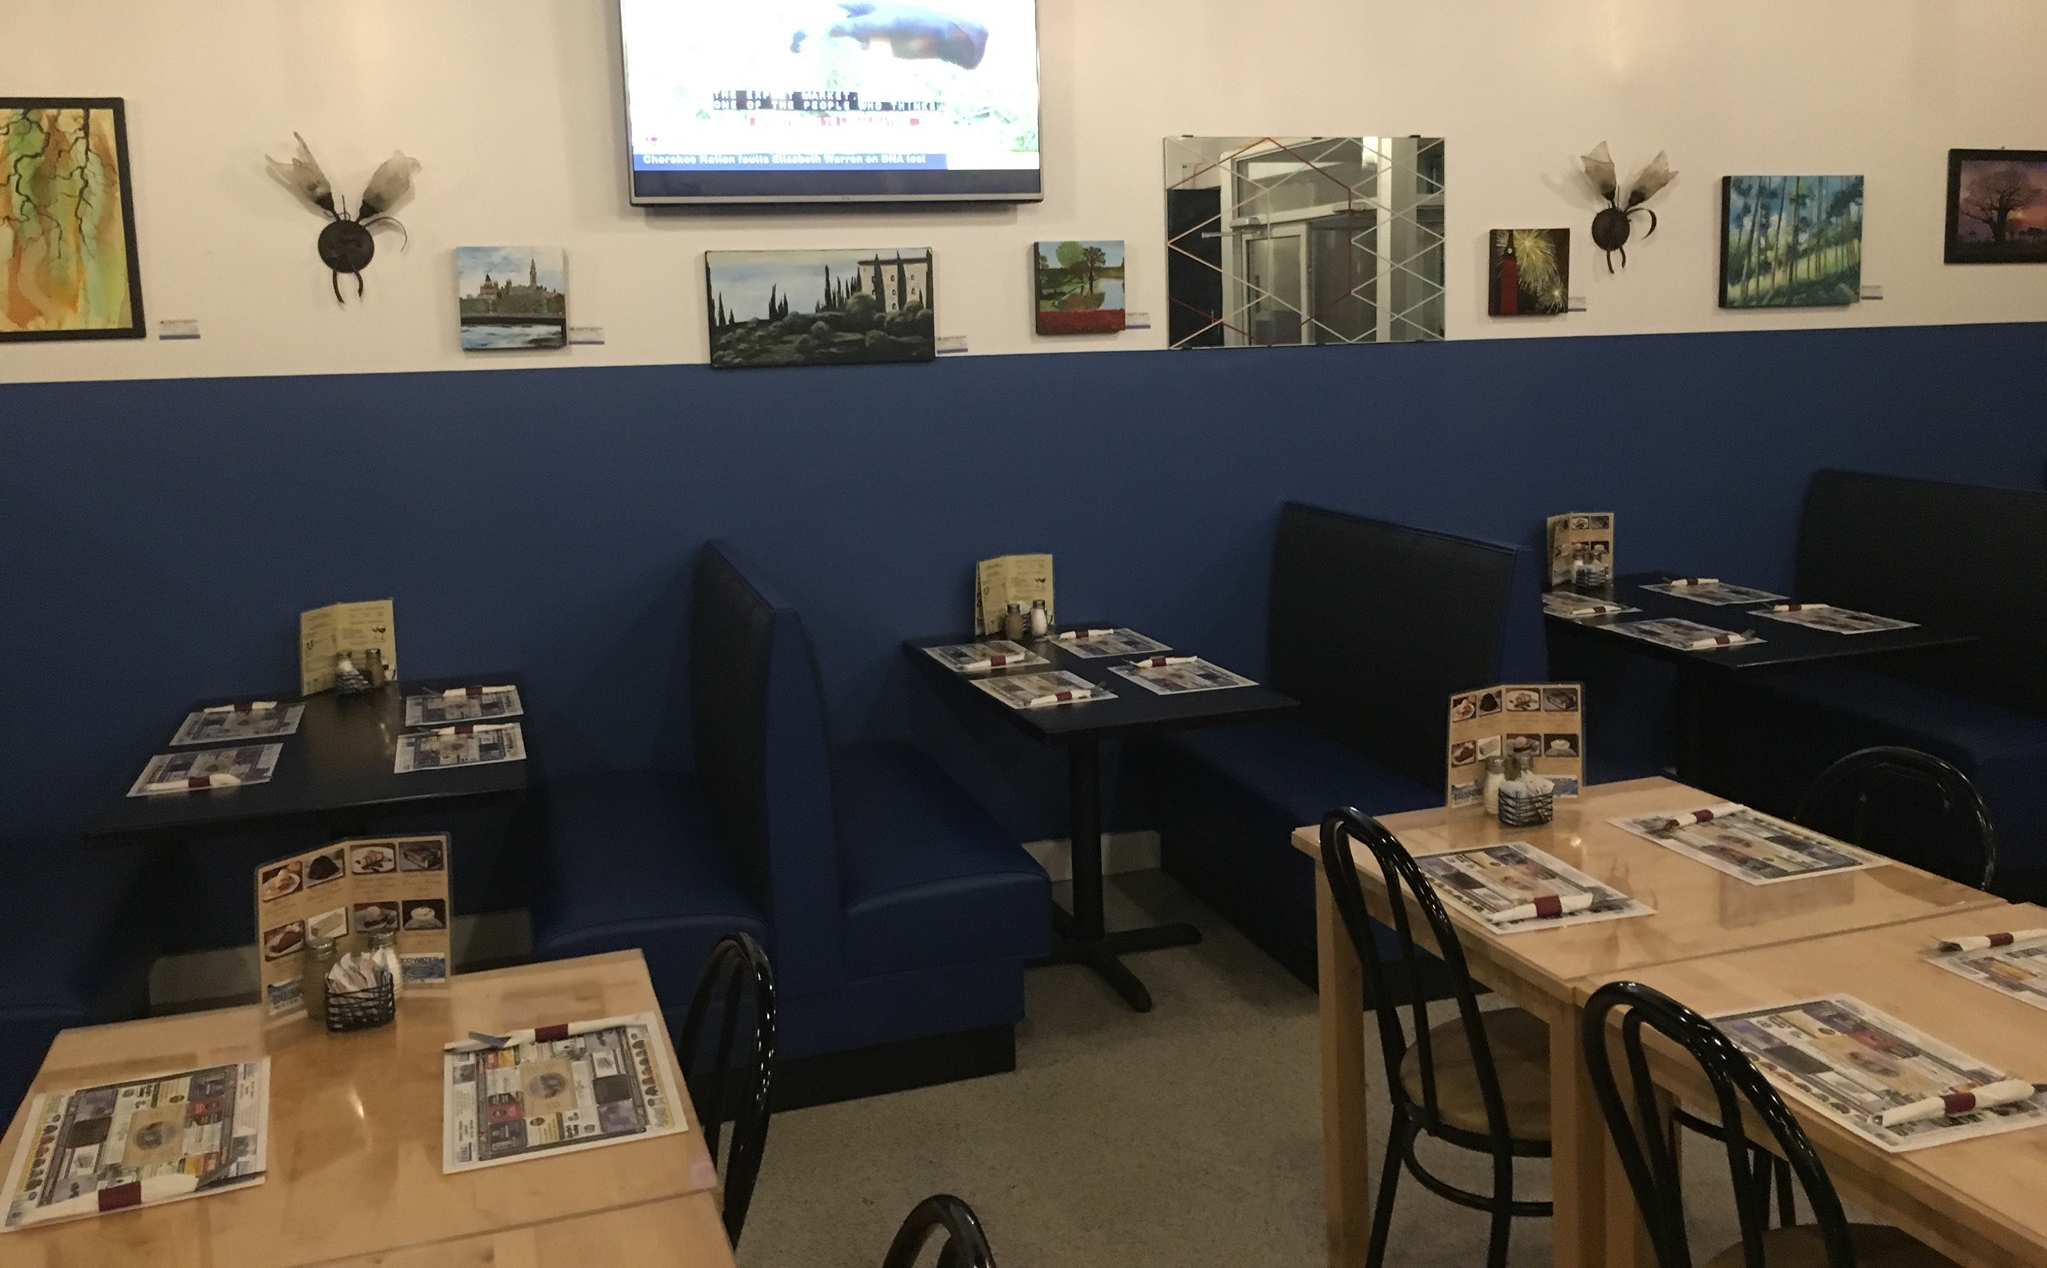 Tables at a restaurant against a blue wall